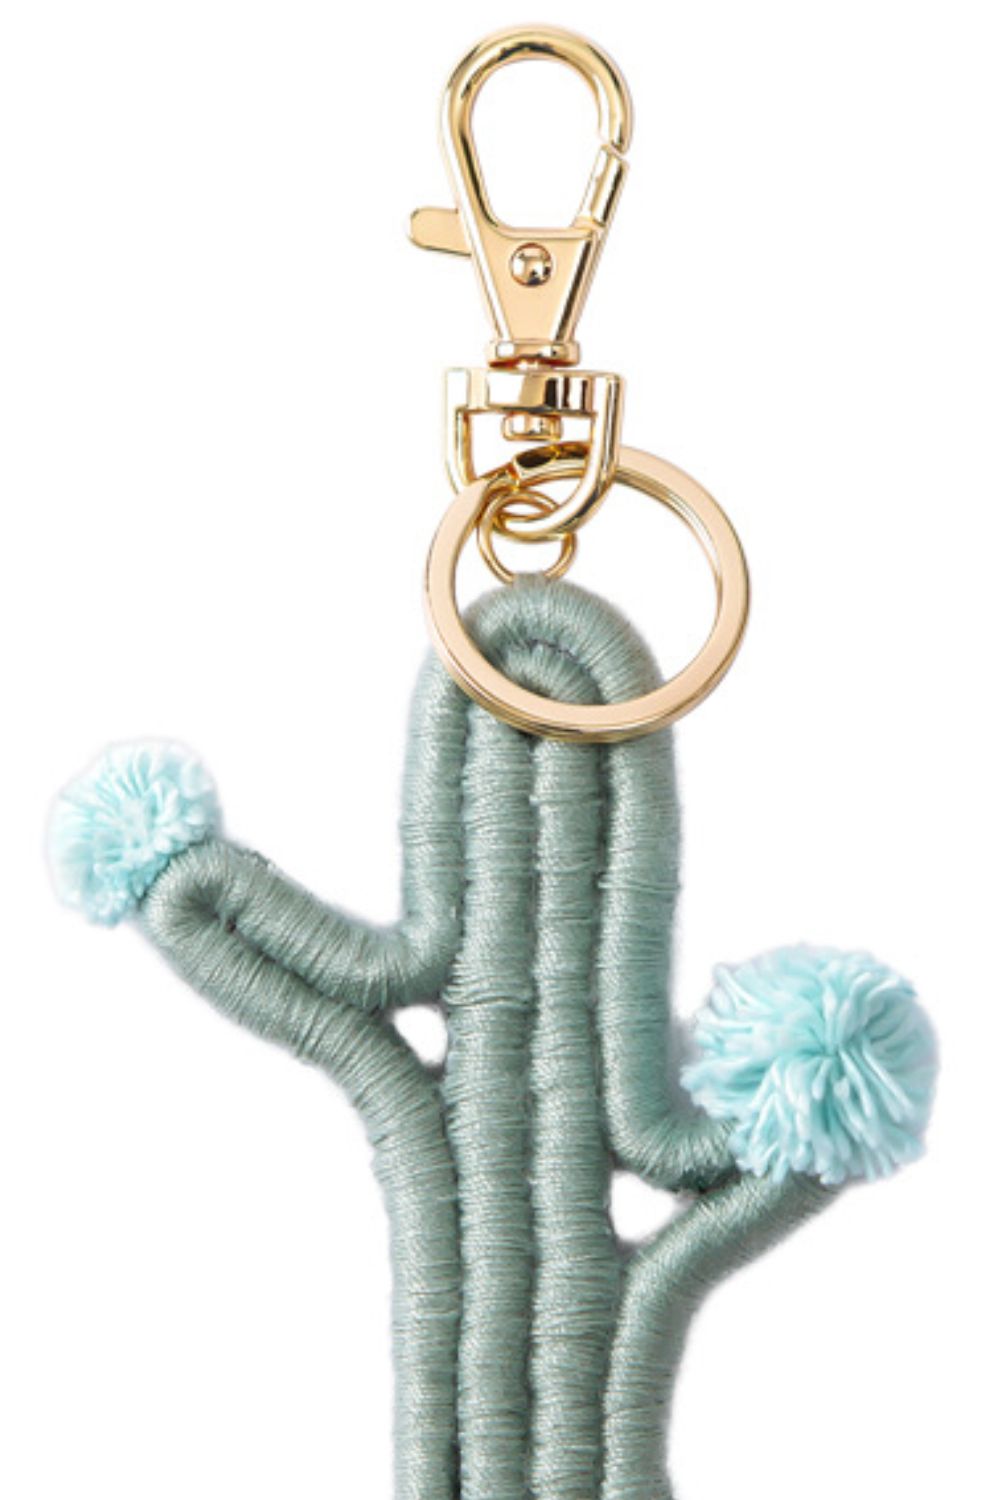 Cactus Keychain with Fringe The Stout Steer